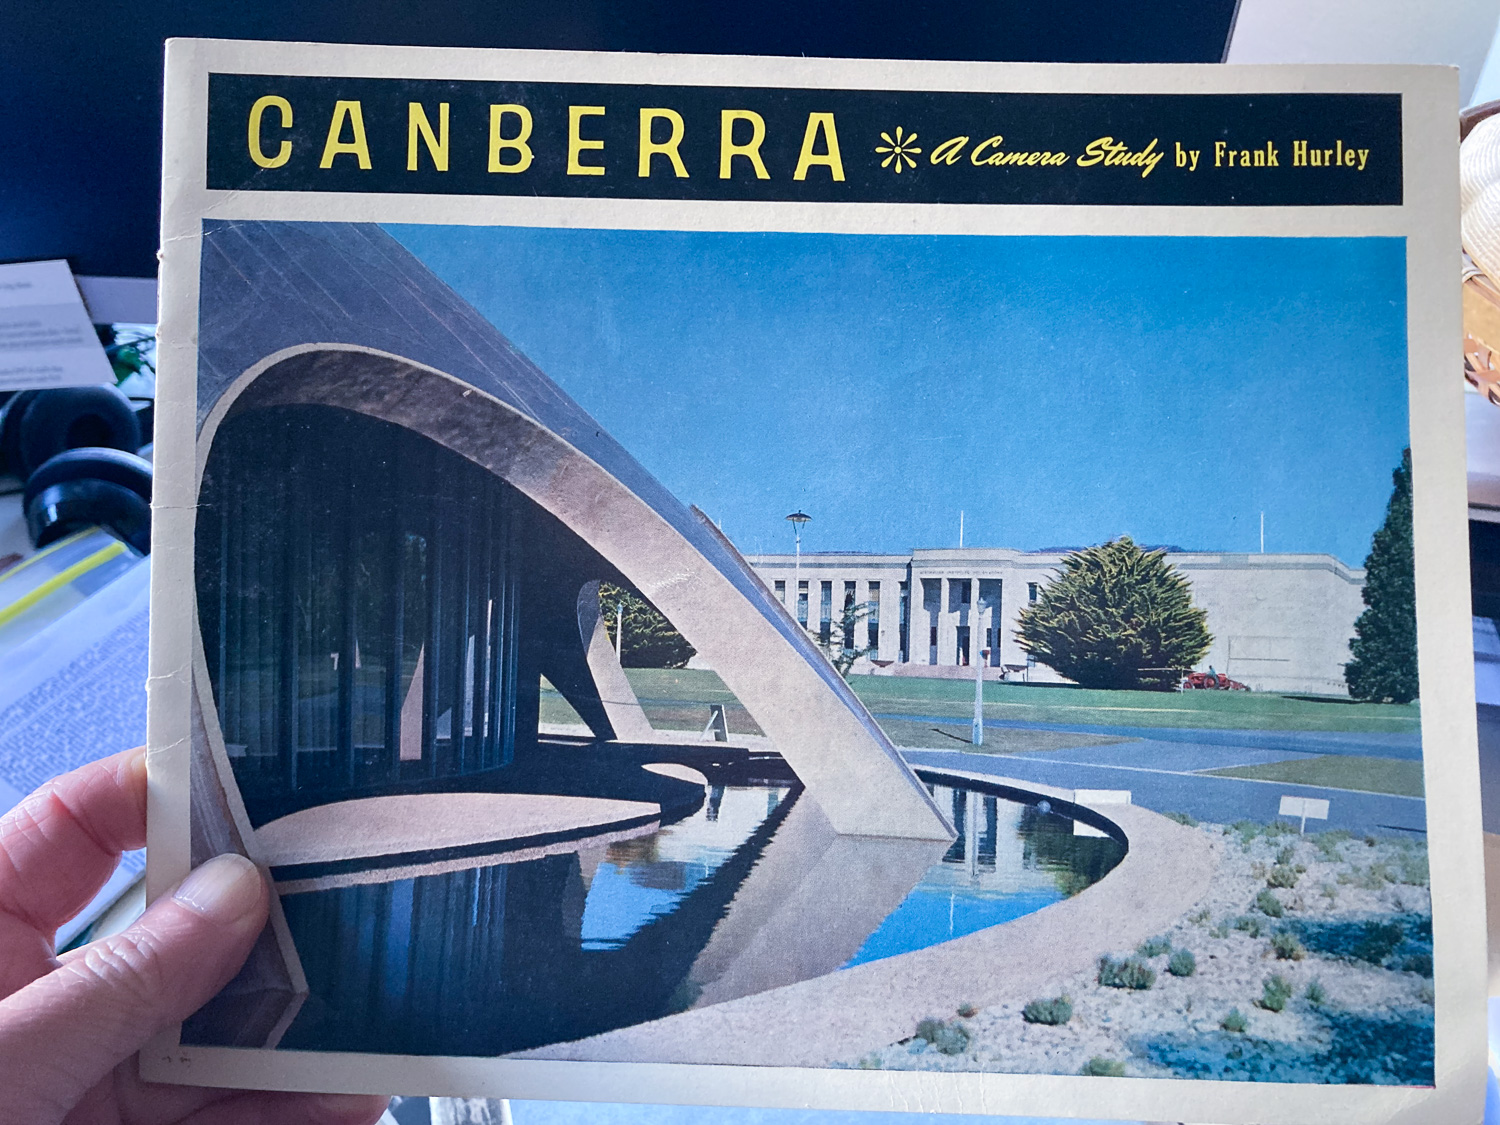 The front cover of a book called Canberra with a photo of a dome-like concrete building